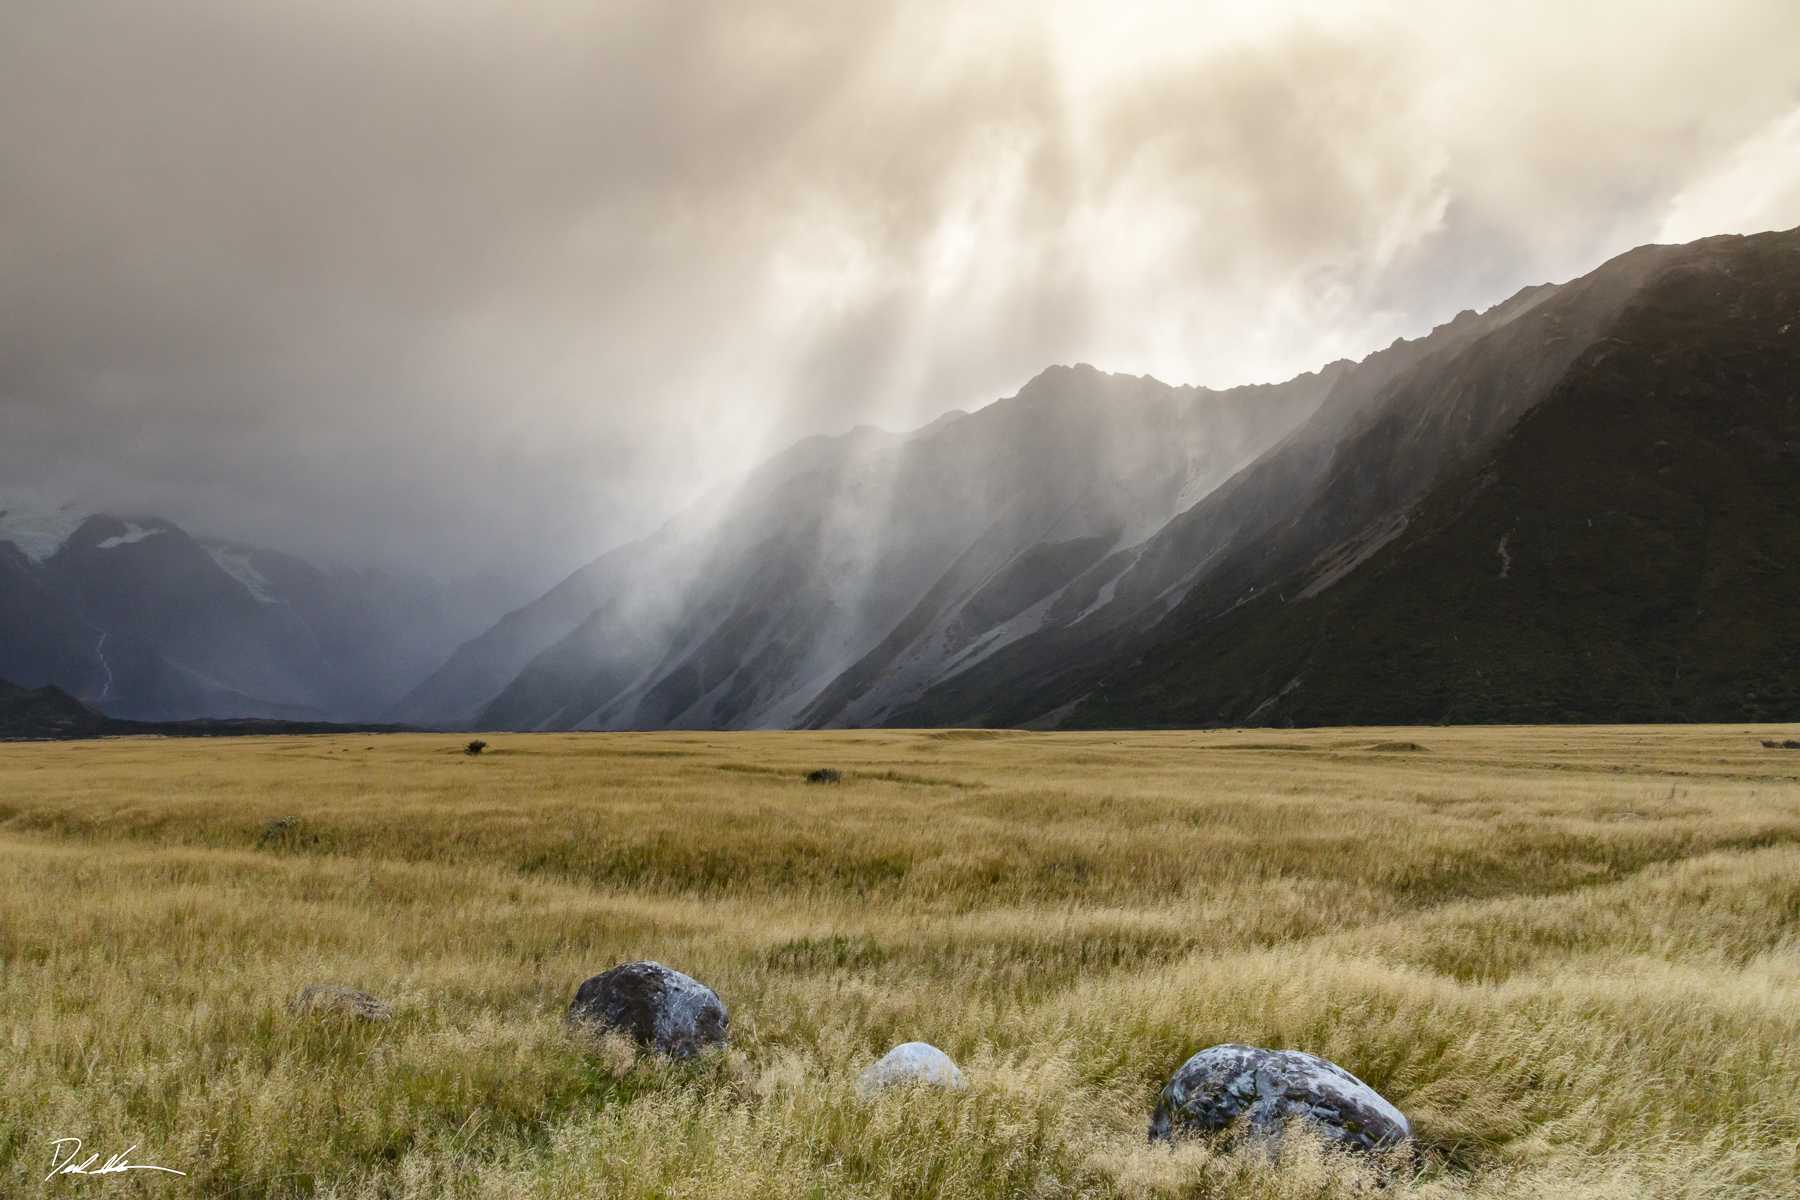 Mountain in New Zealand during storm